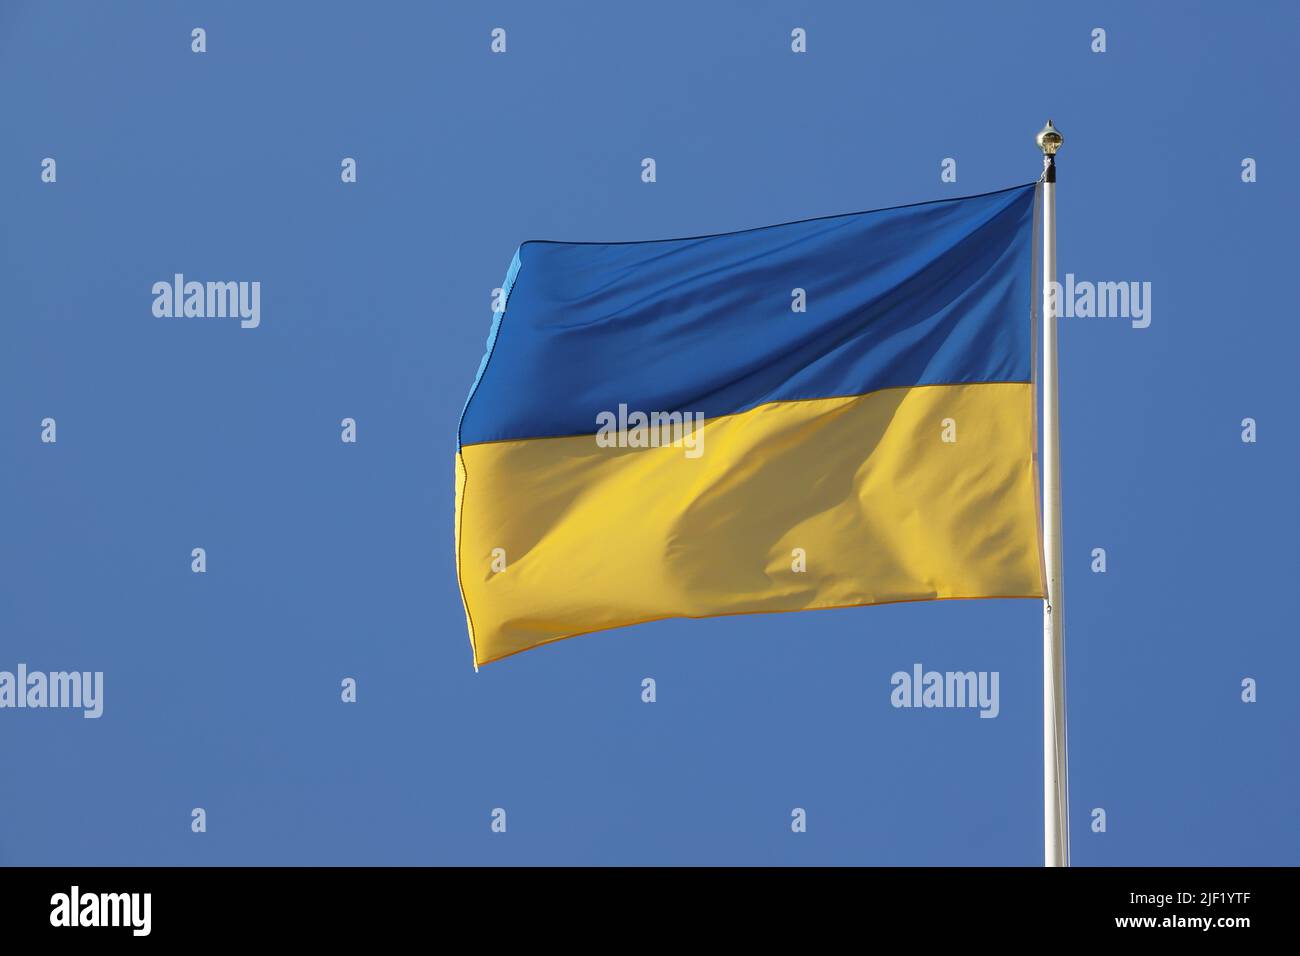 Close-up view of the Ukraine national flag against a blue clear sky. Stock Photo